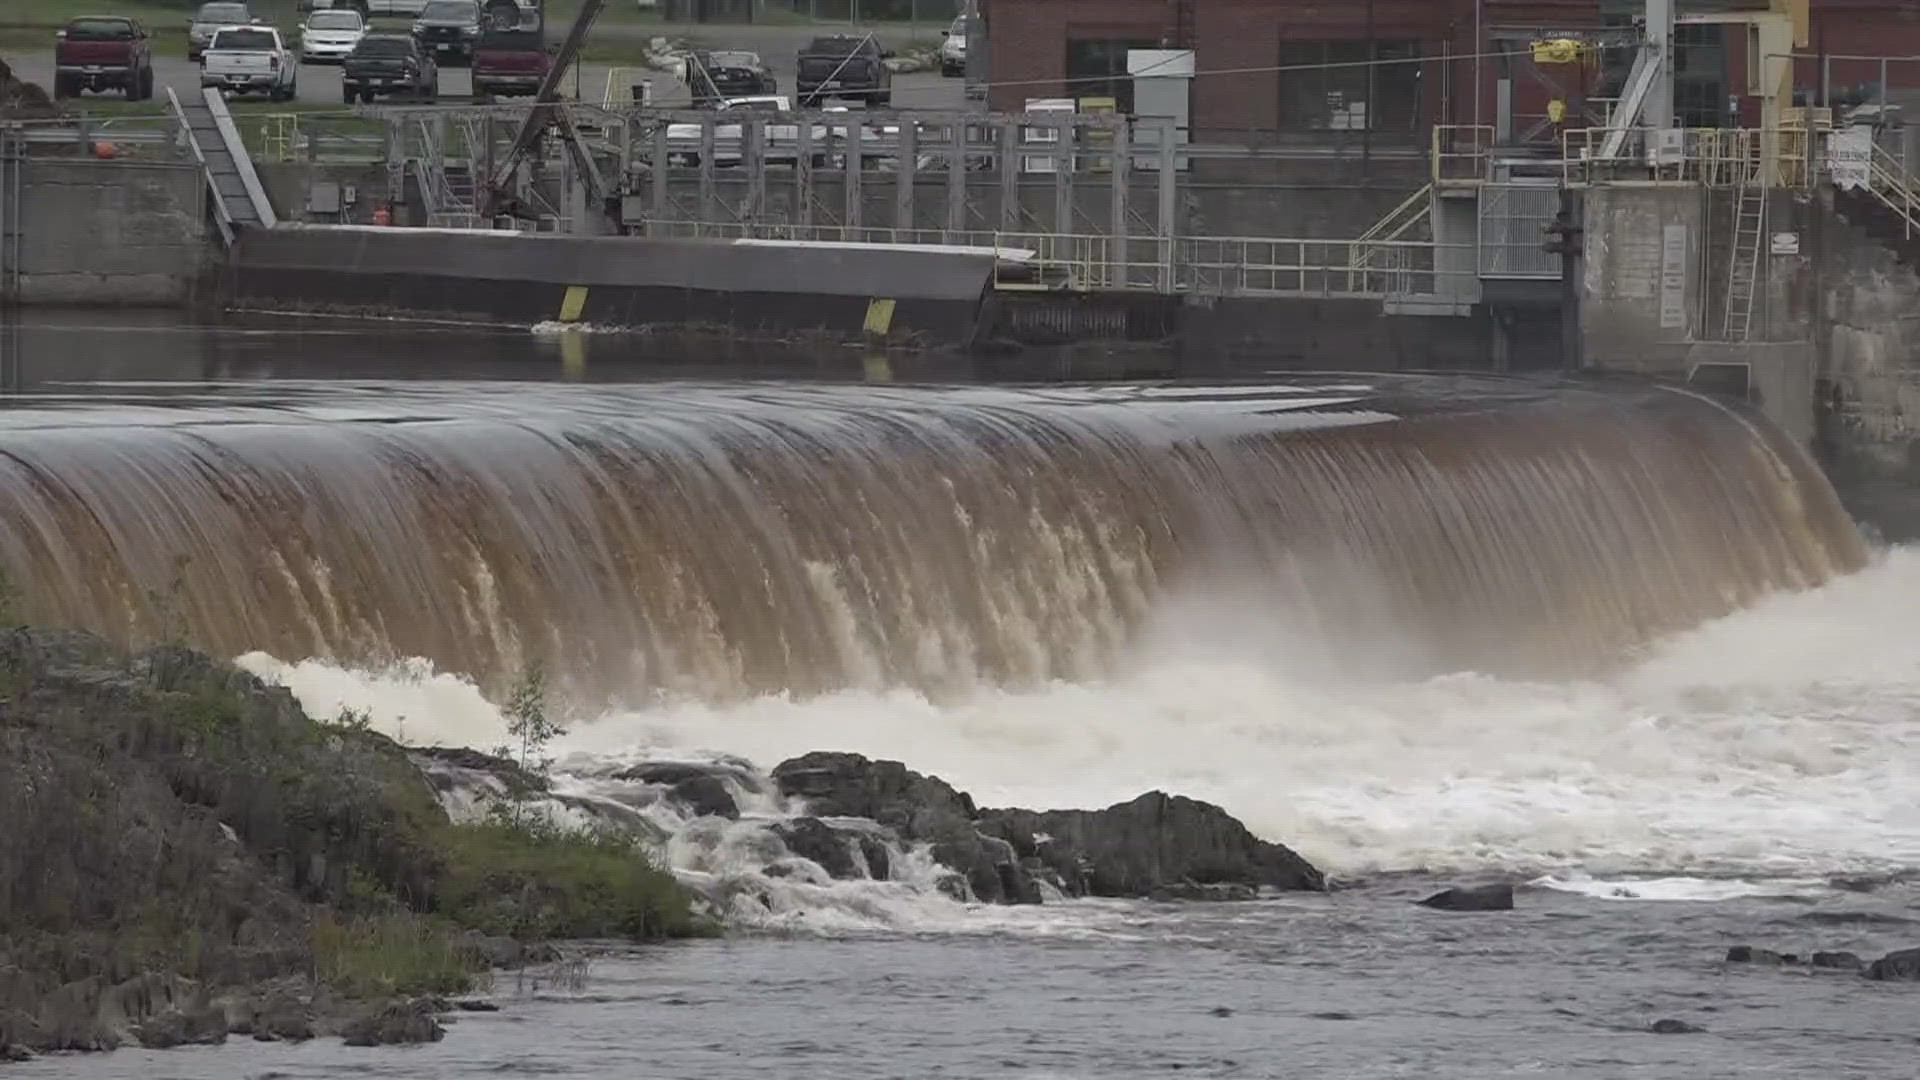 While the Atlantic salmon population has grown in recent years, it's still far below what it once was in the Penobscot River.